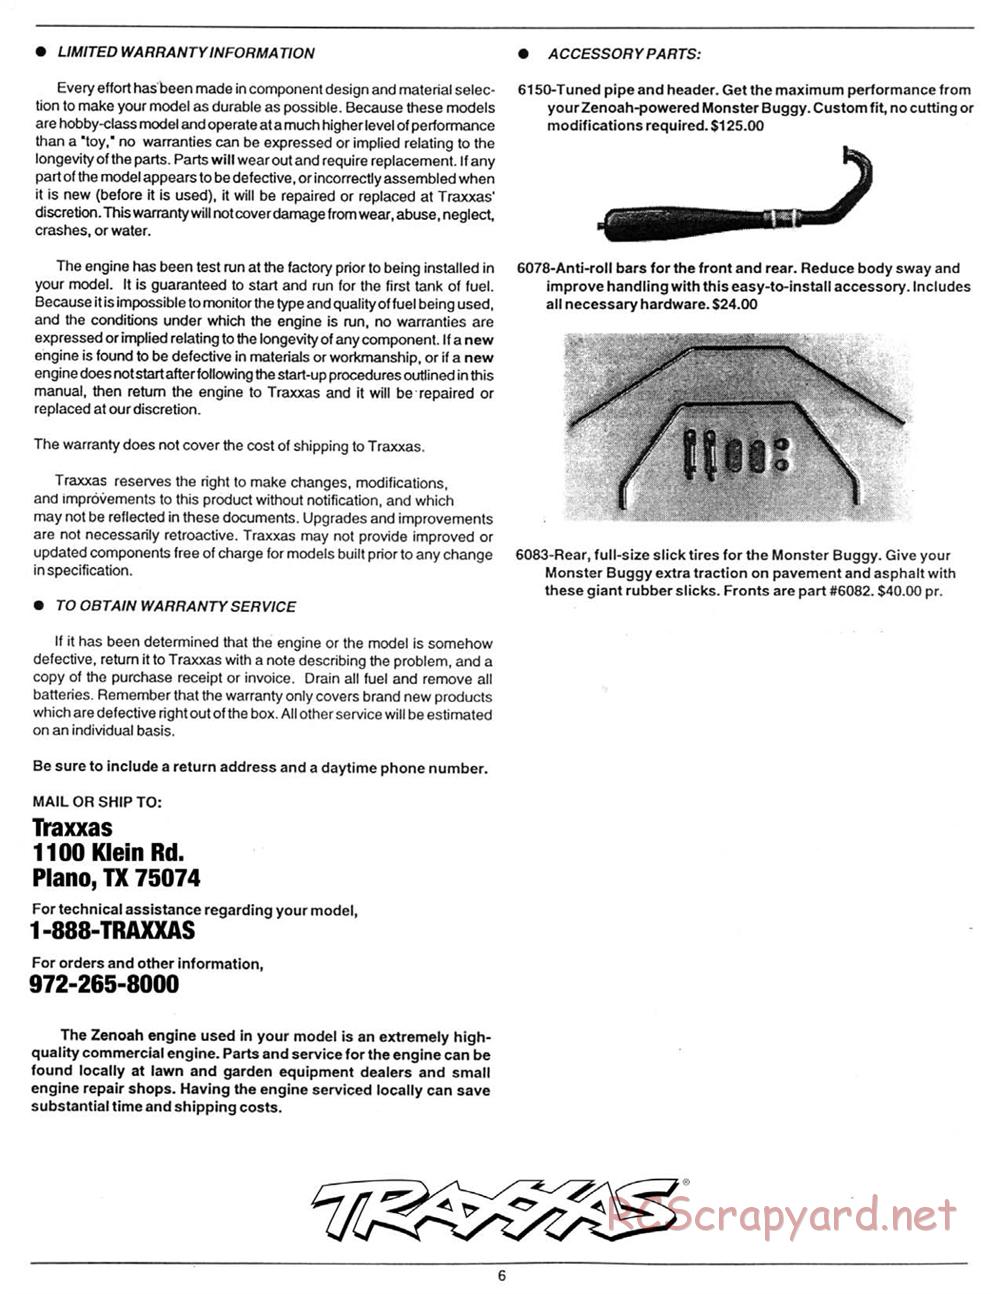 Traxxas - Monster Buggy (Gas Buggy) (1993) - Manual - Page 6